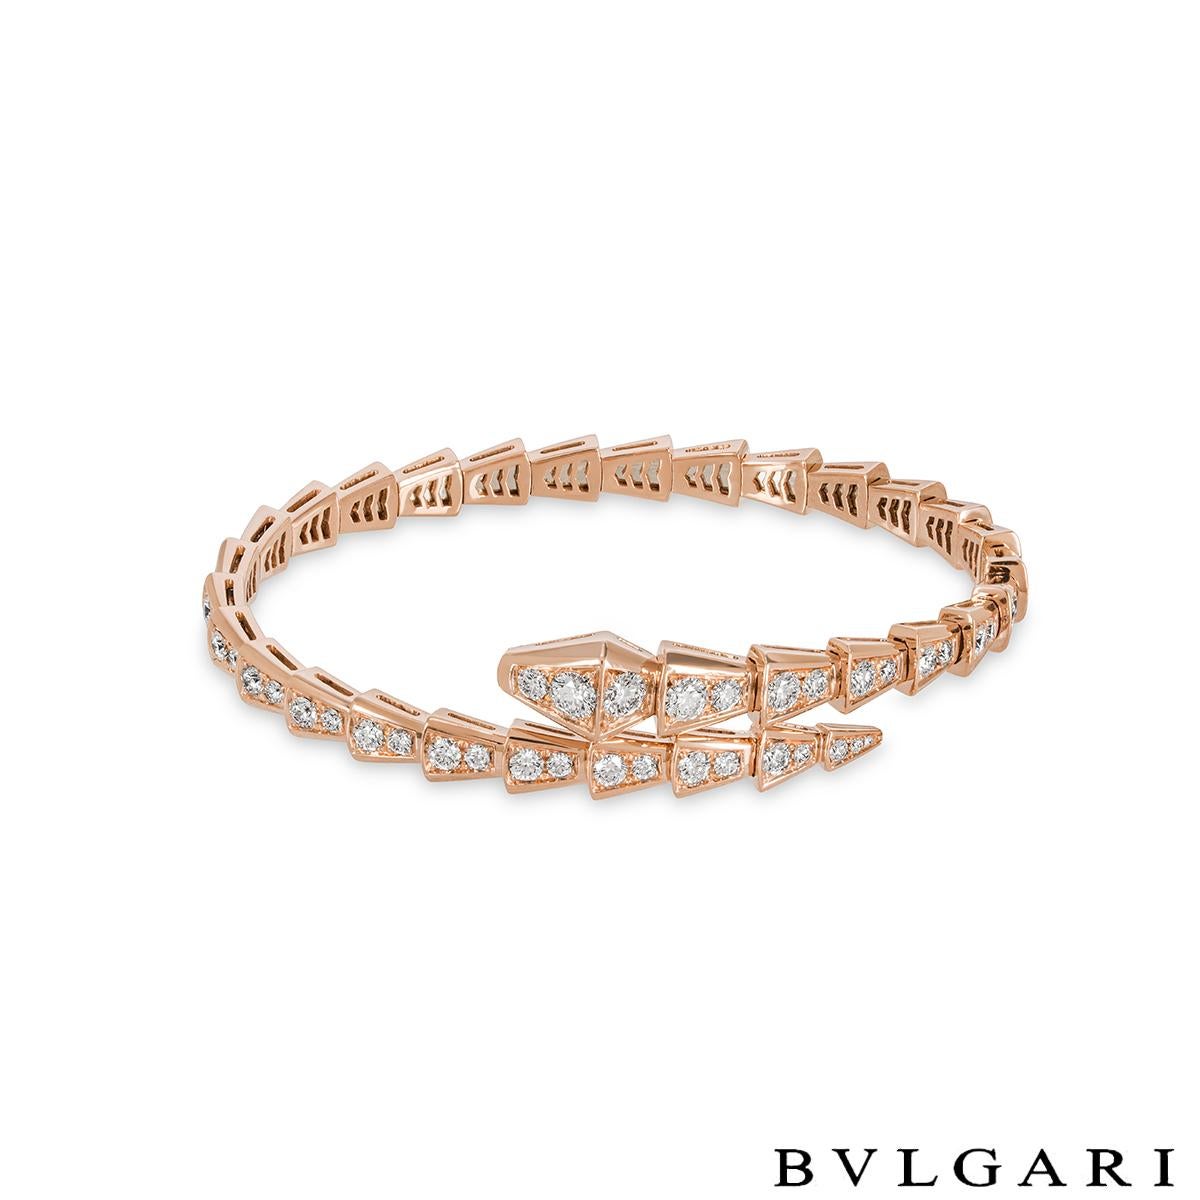 A sophisticated 18k rose gold diamond bracelet by Bvlgari from the Serpenti collection. The bracelet is in the form of a serpent that coils around the wrist with 33 diamond set sections. The 68 round brilliant cut diamonds have an approximate total